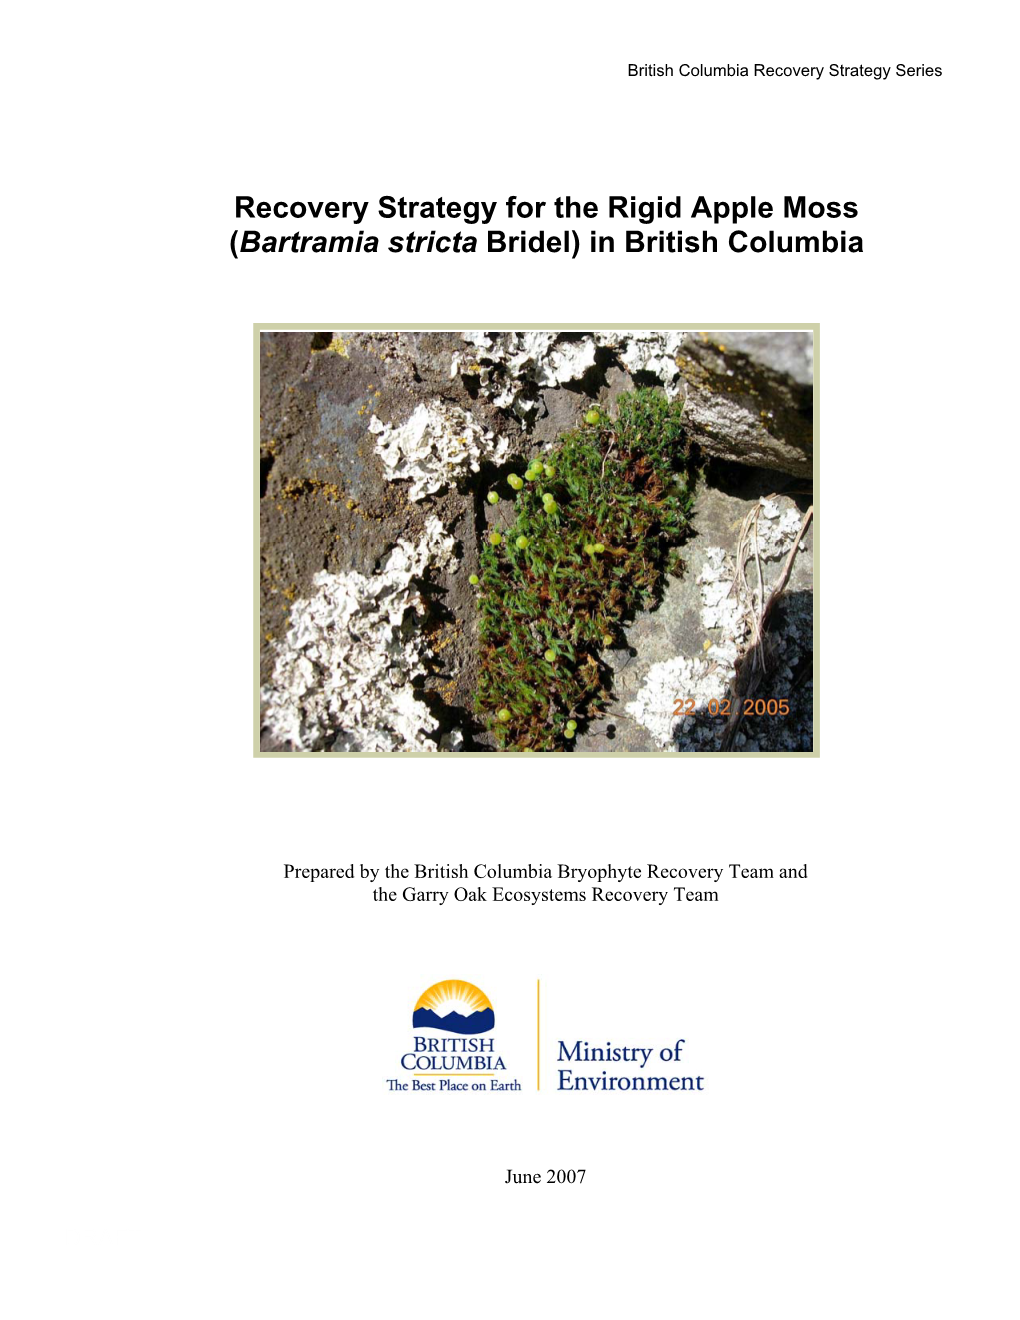 Recovery Strategy for Rigid Apple Moss (Bartramia Stricta Bridel) In